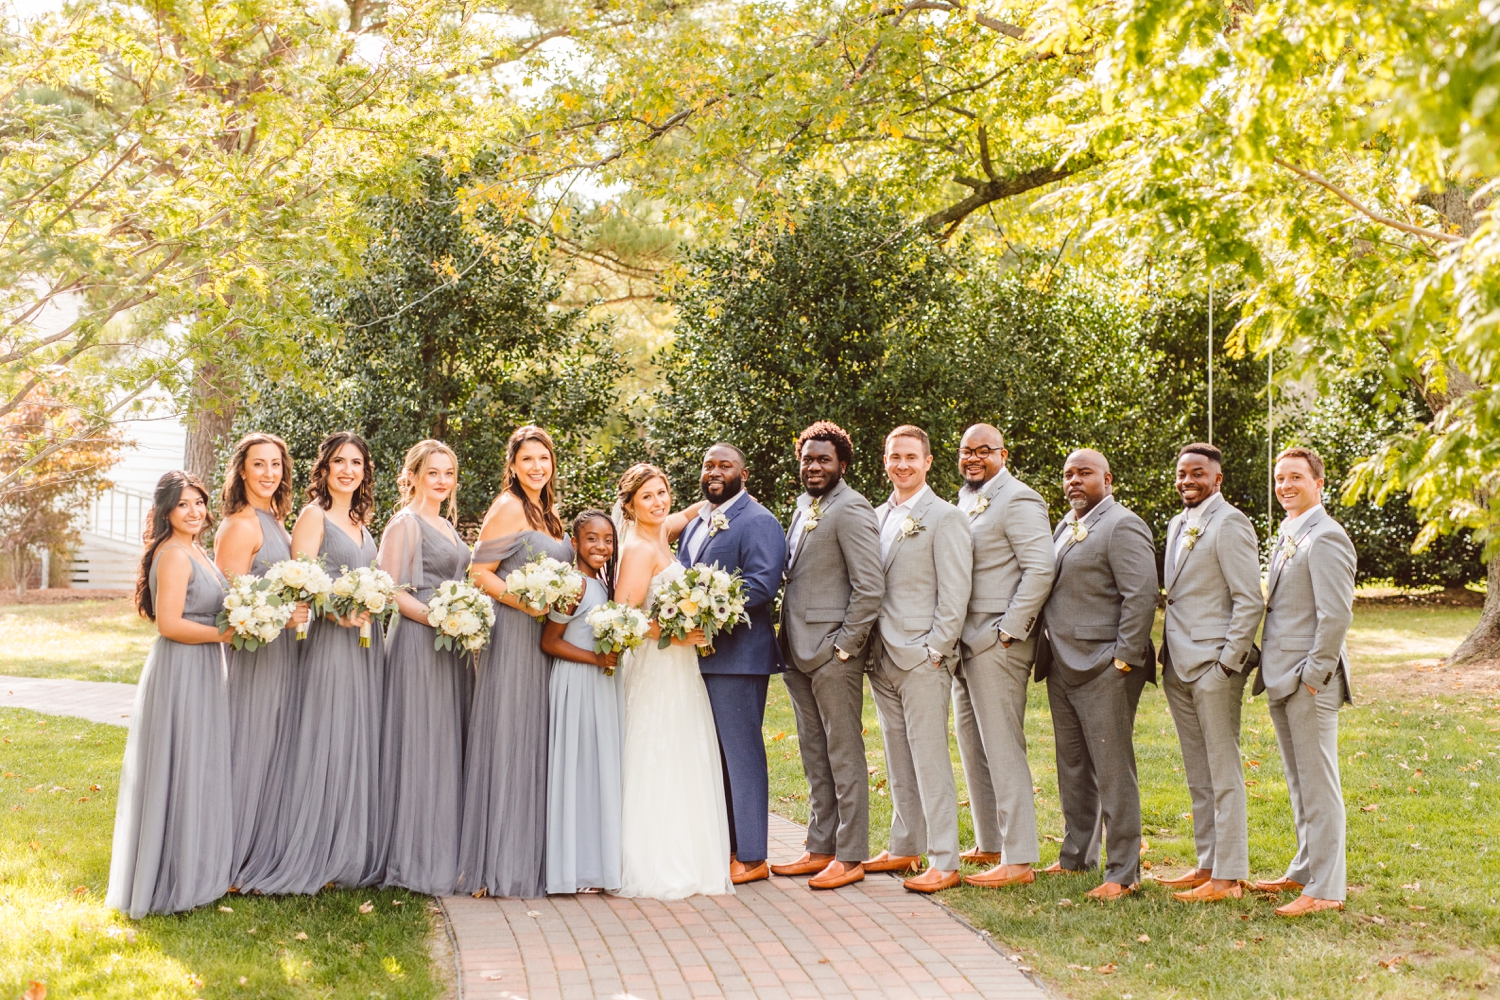 Bride and groom with wedding party at Wylder Hotel Tilghman Island | Brooke Michelle Photography